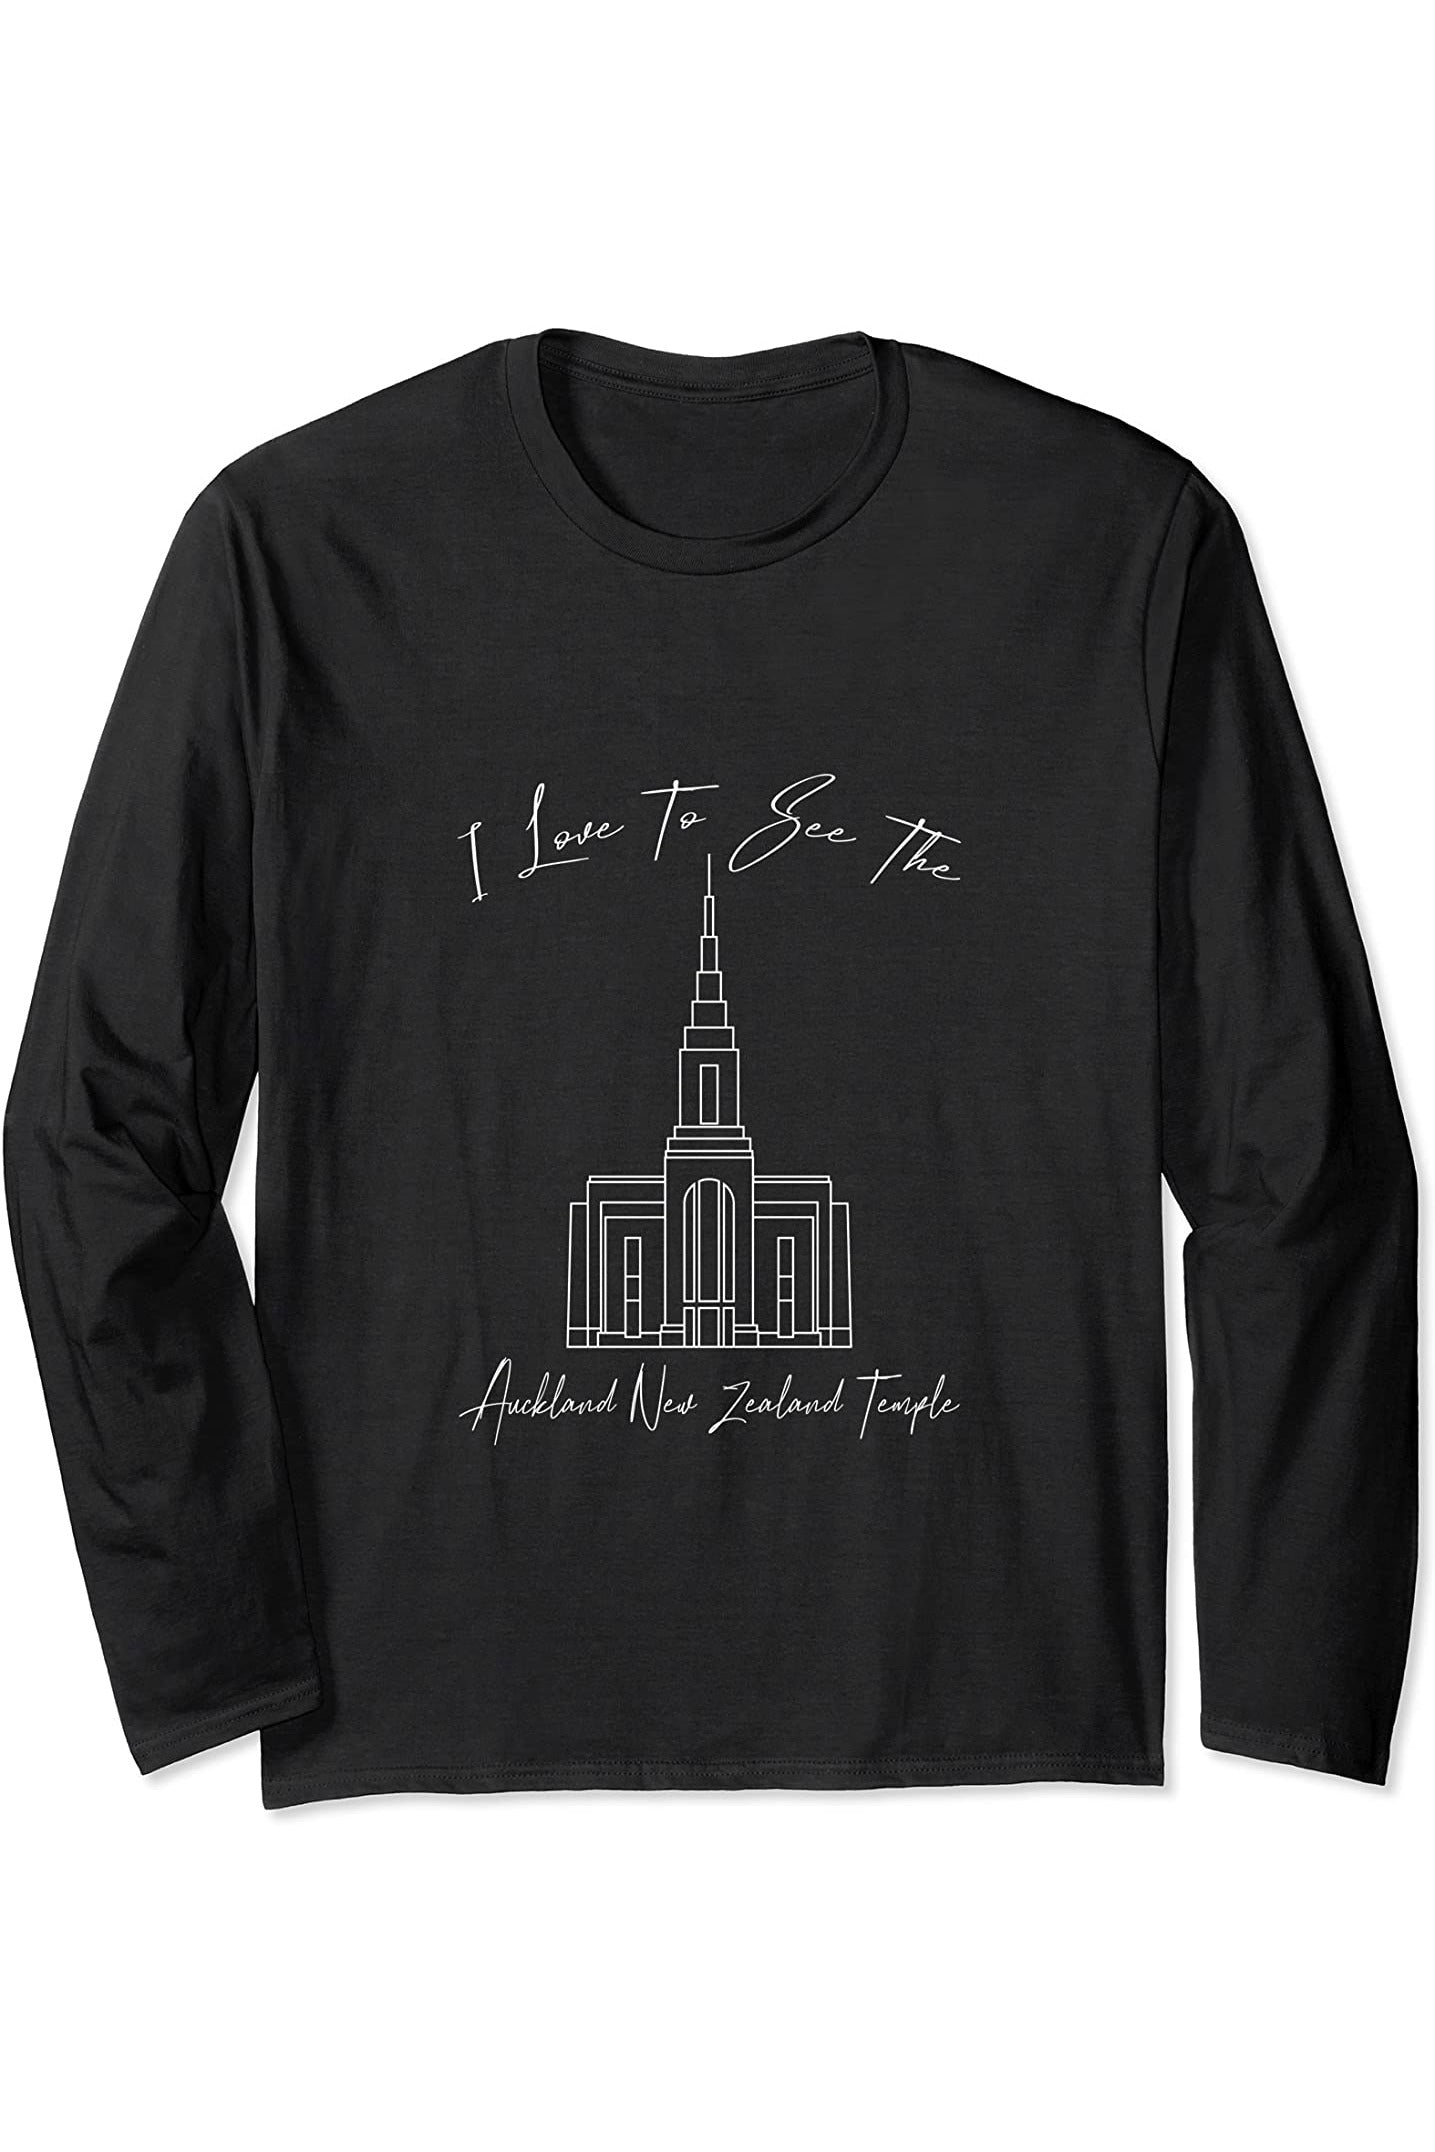 Auckland New Zealand Temple Long Sleeve T-Shirt - Calligraphy Style (English) US